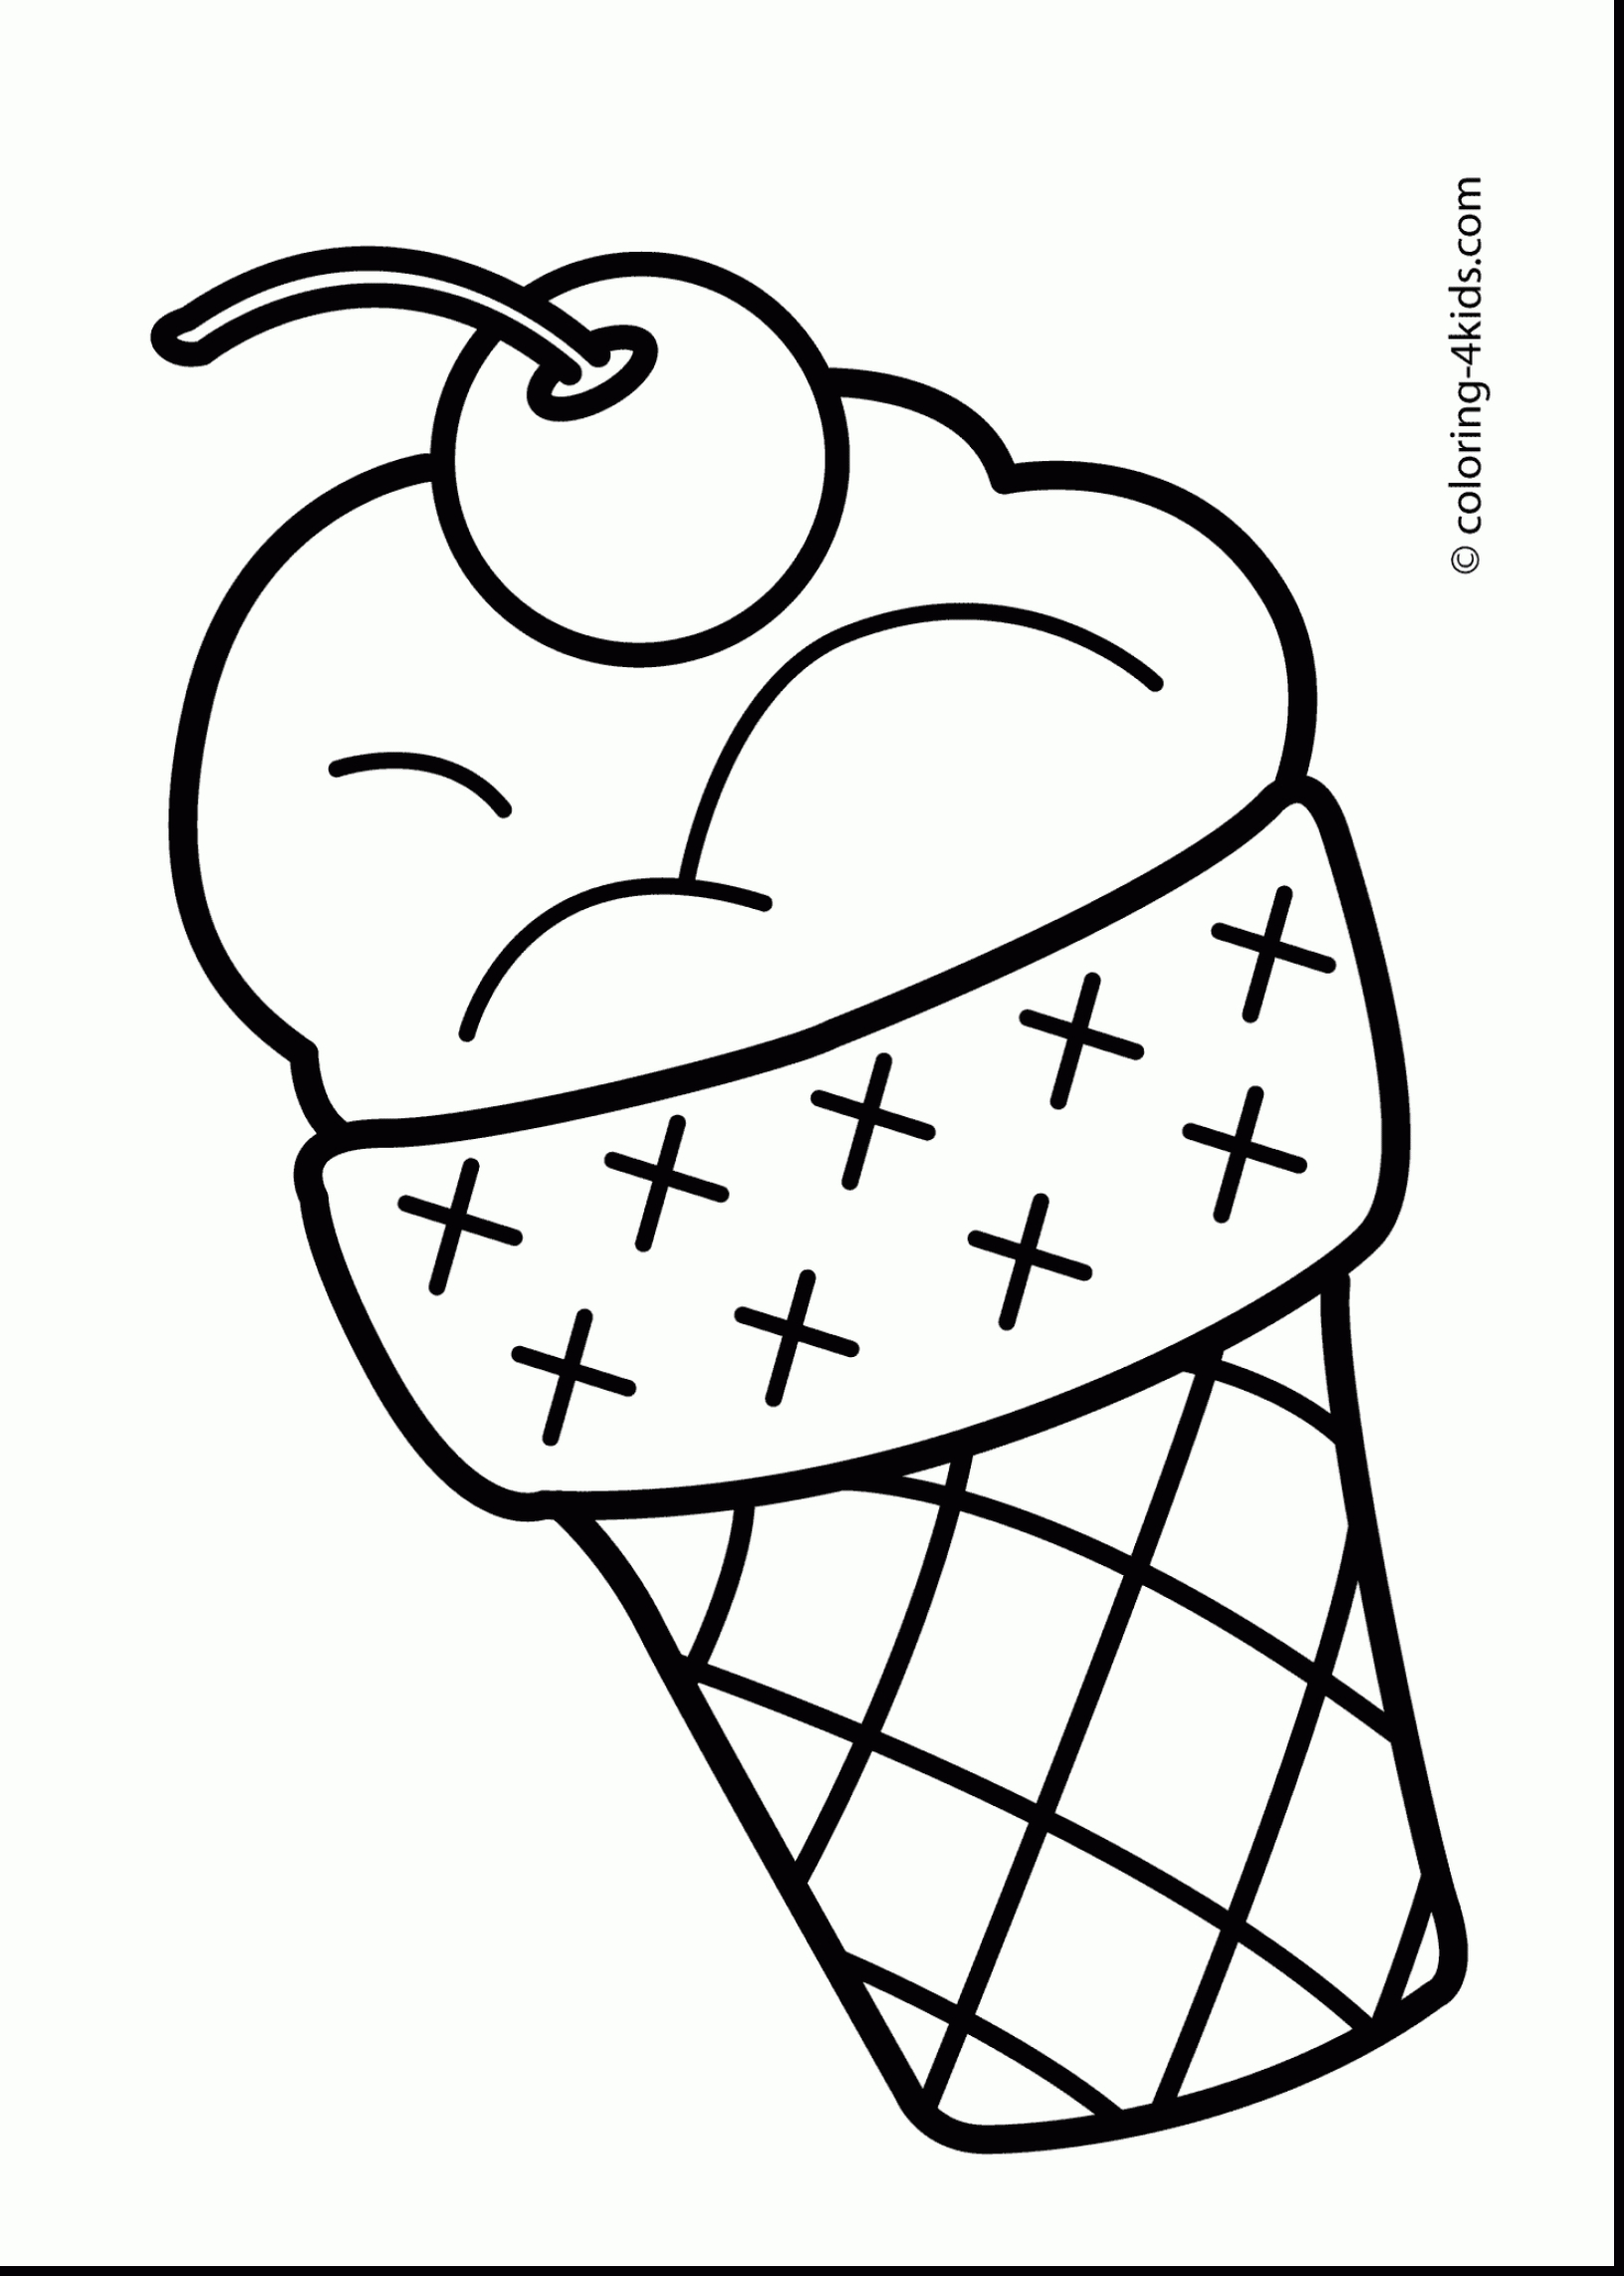 Coloring Pages : Free Printable Coloring Pages For Toddlers Color - Free Printable Coloring Pages For Preschoolers